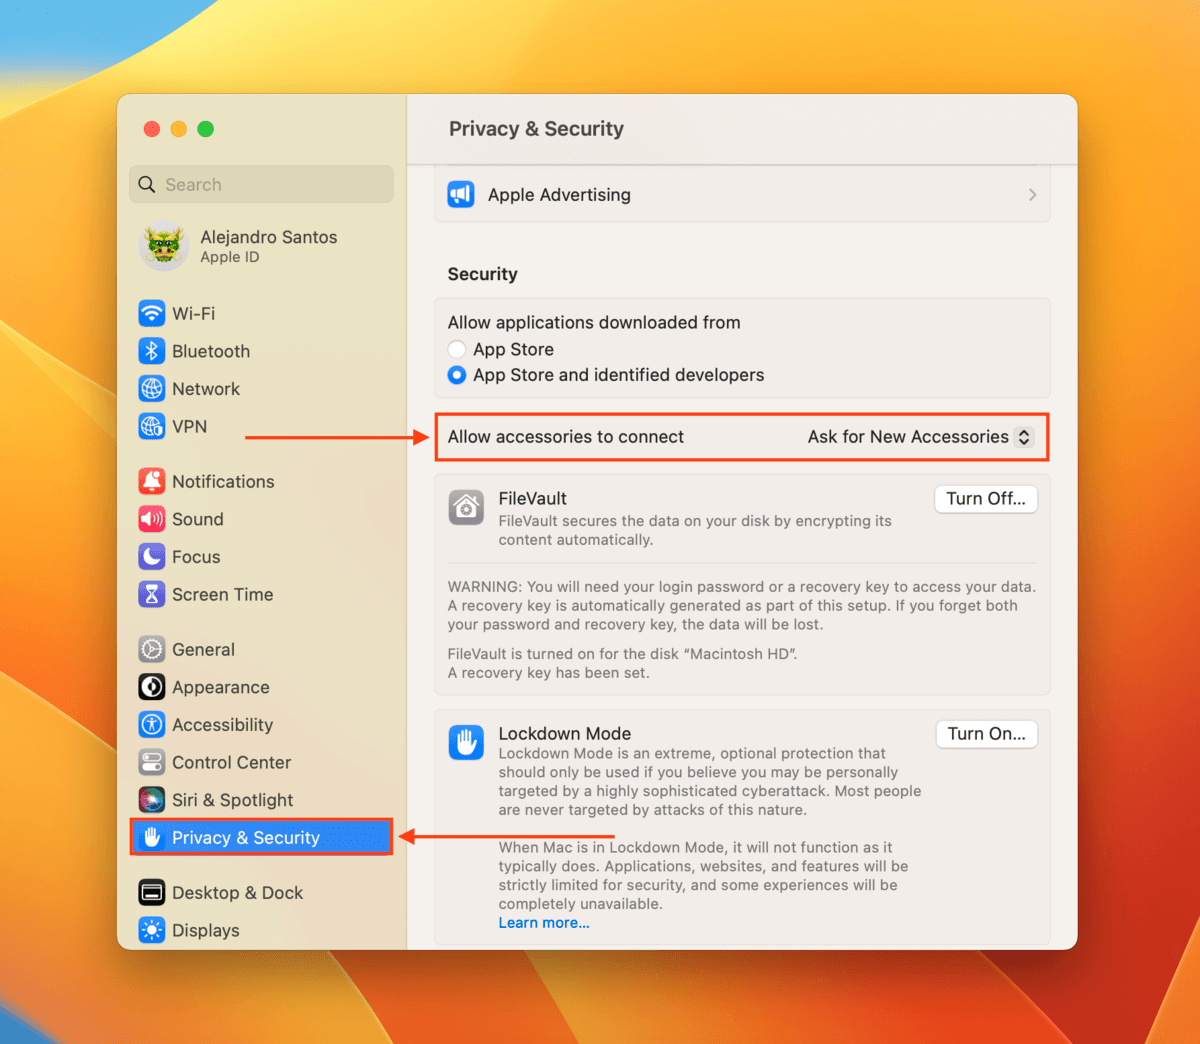 Security Section in macOS System Settings menu